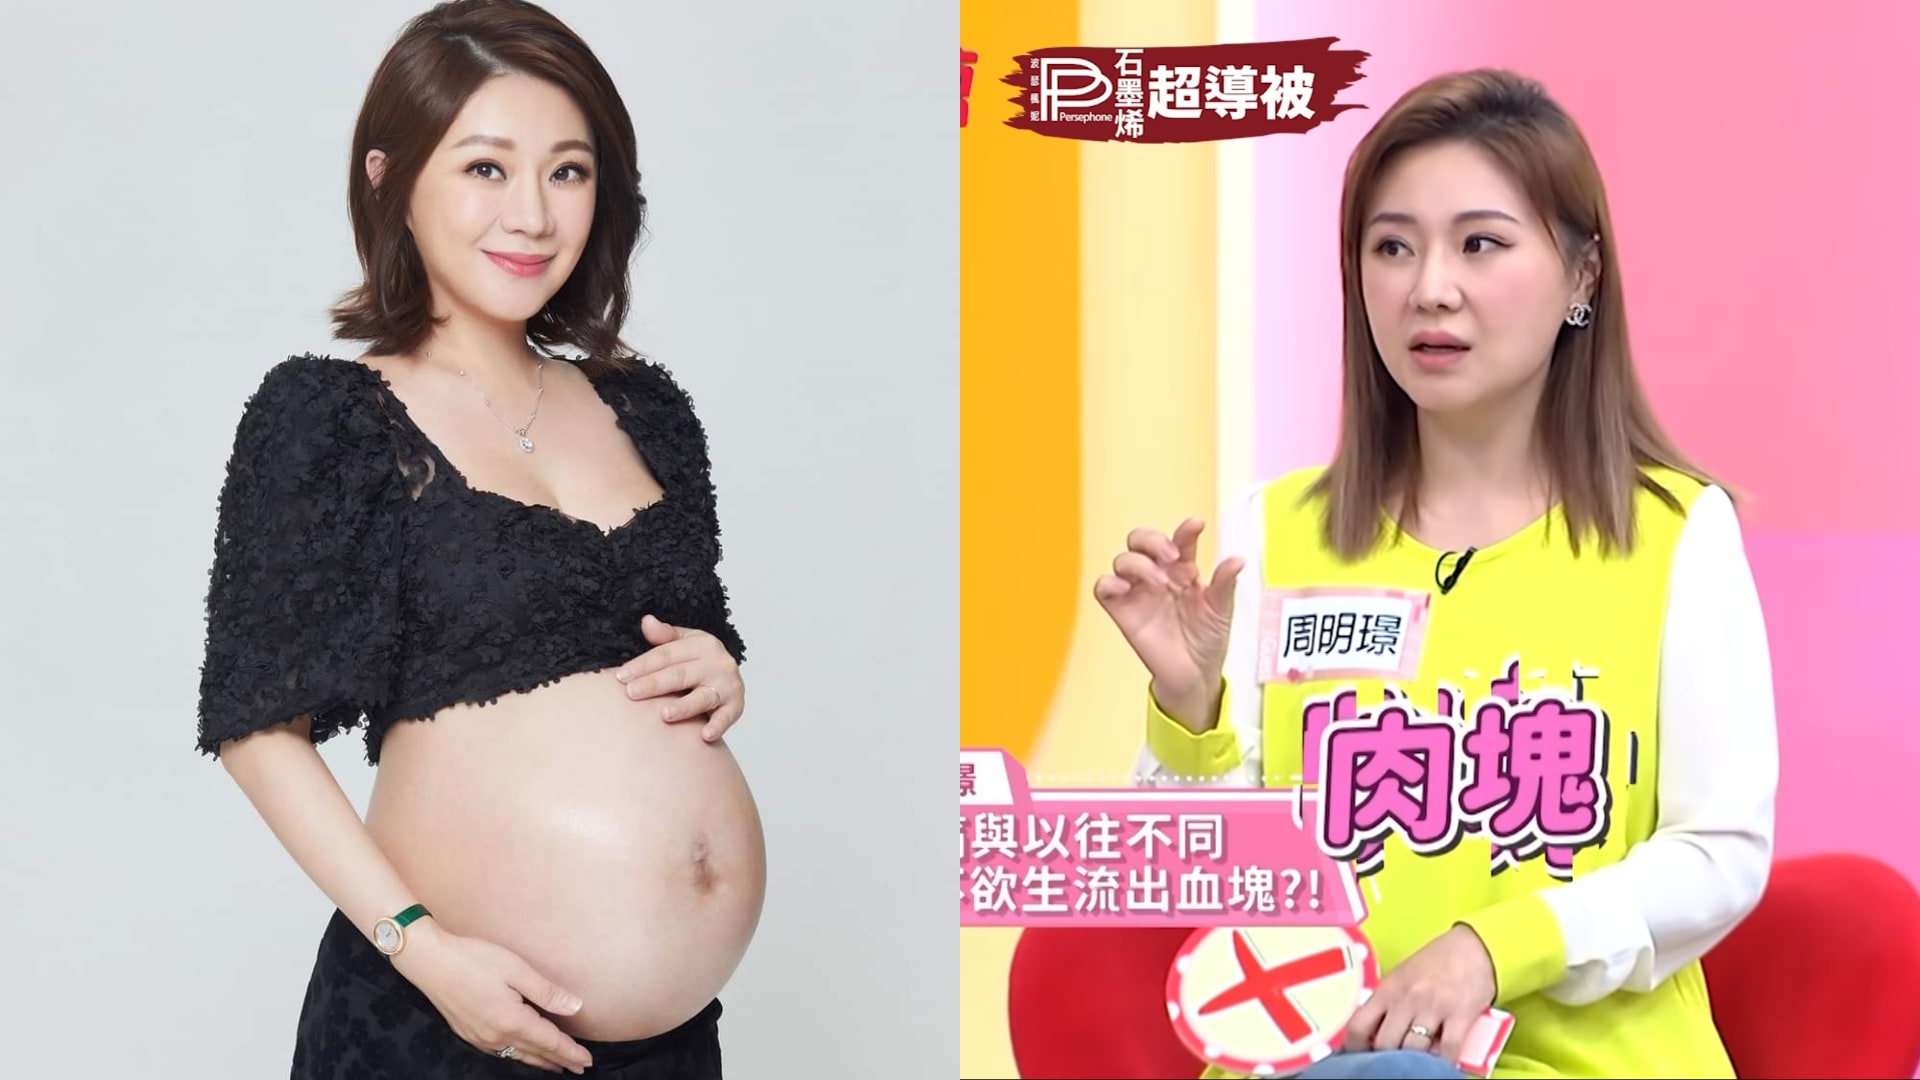 This Former Taiwanese News Anchor Discharged A “Piece Of Flesh” After Experiencing “The Worst Period Pain” In Her Life